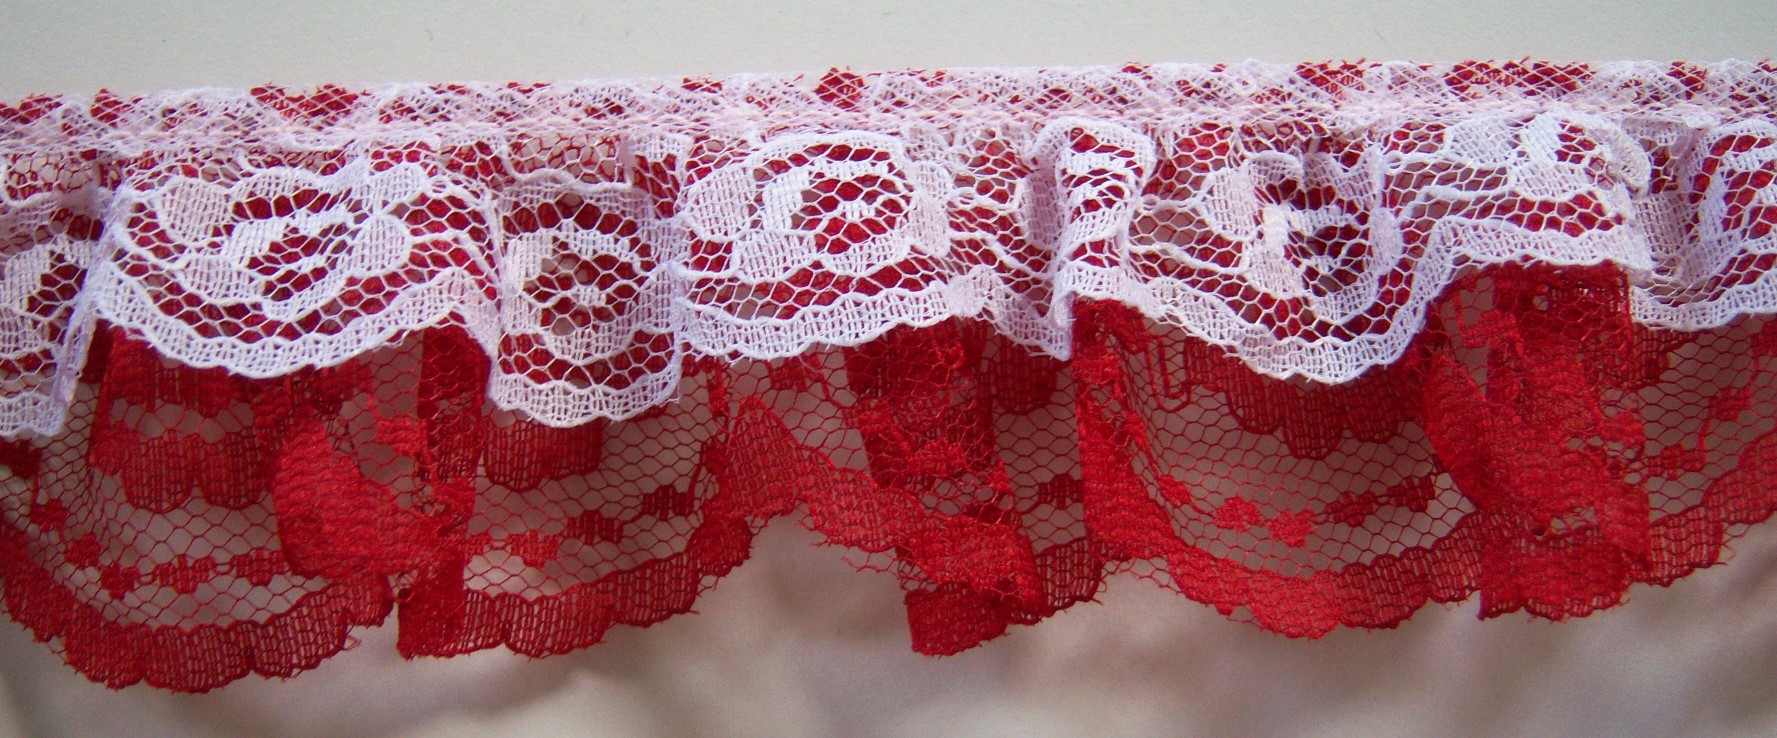 White/Cranberry Double Gathered Lace